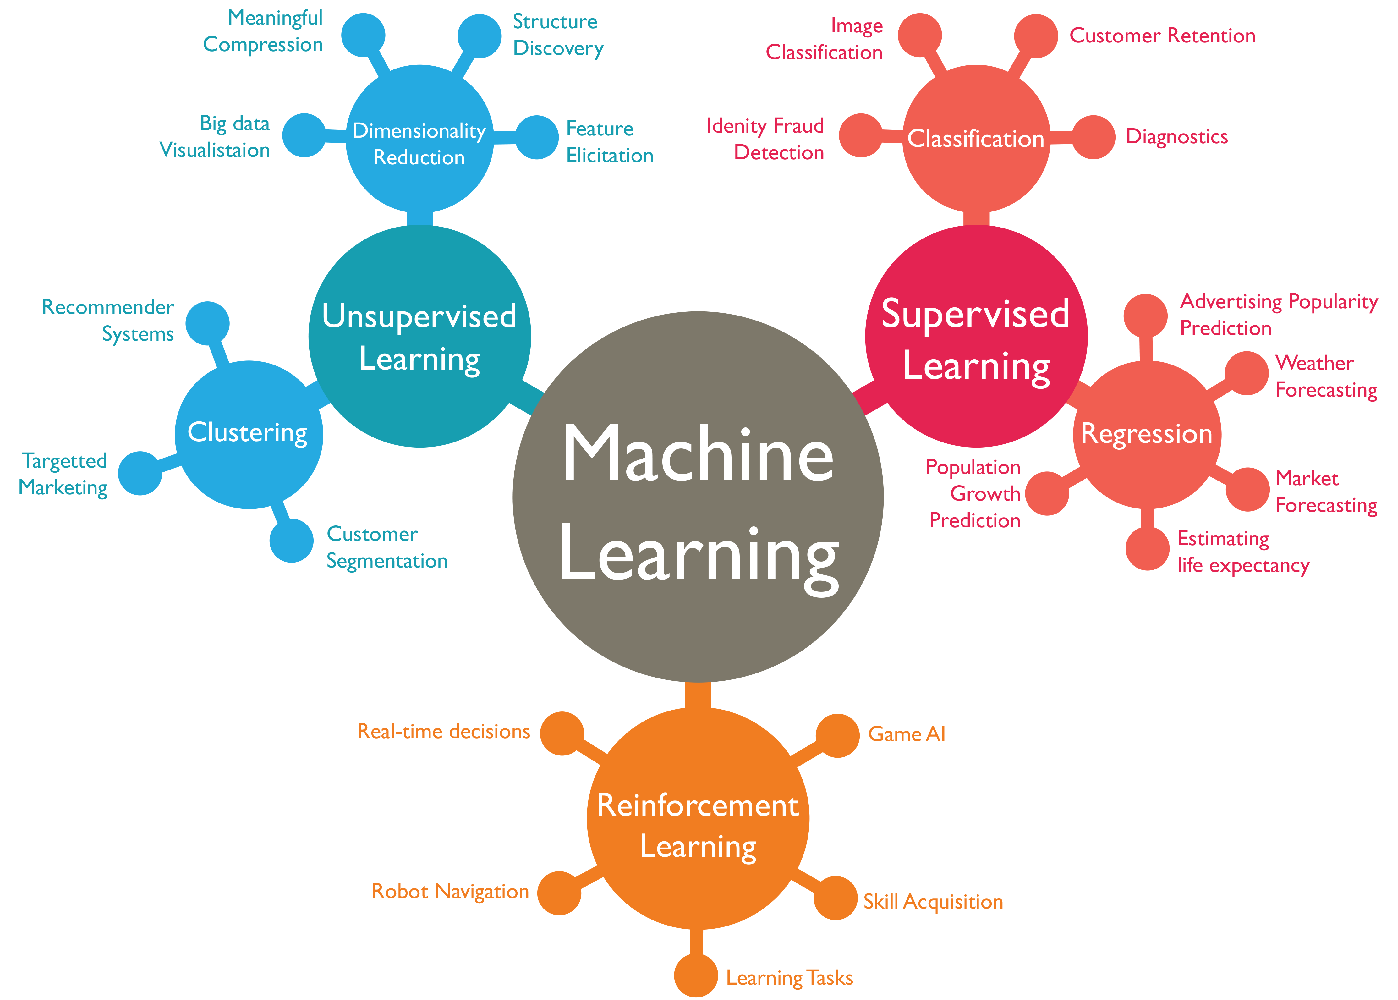 WHAT IS MACHINE LEARNING?